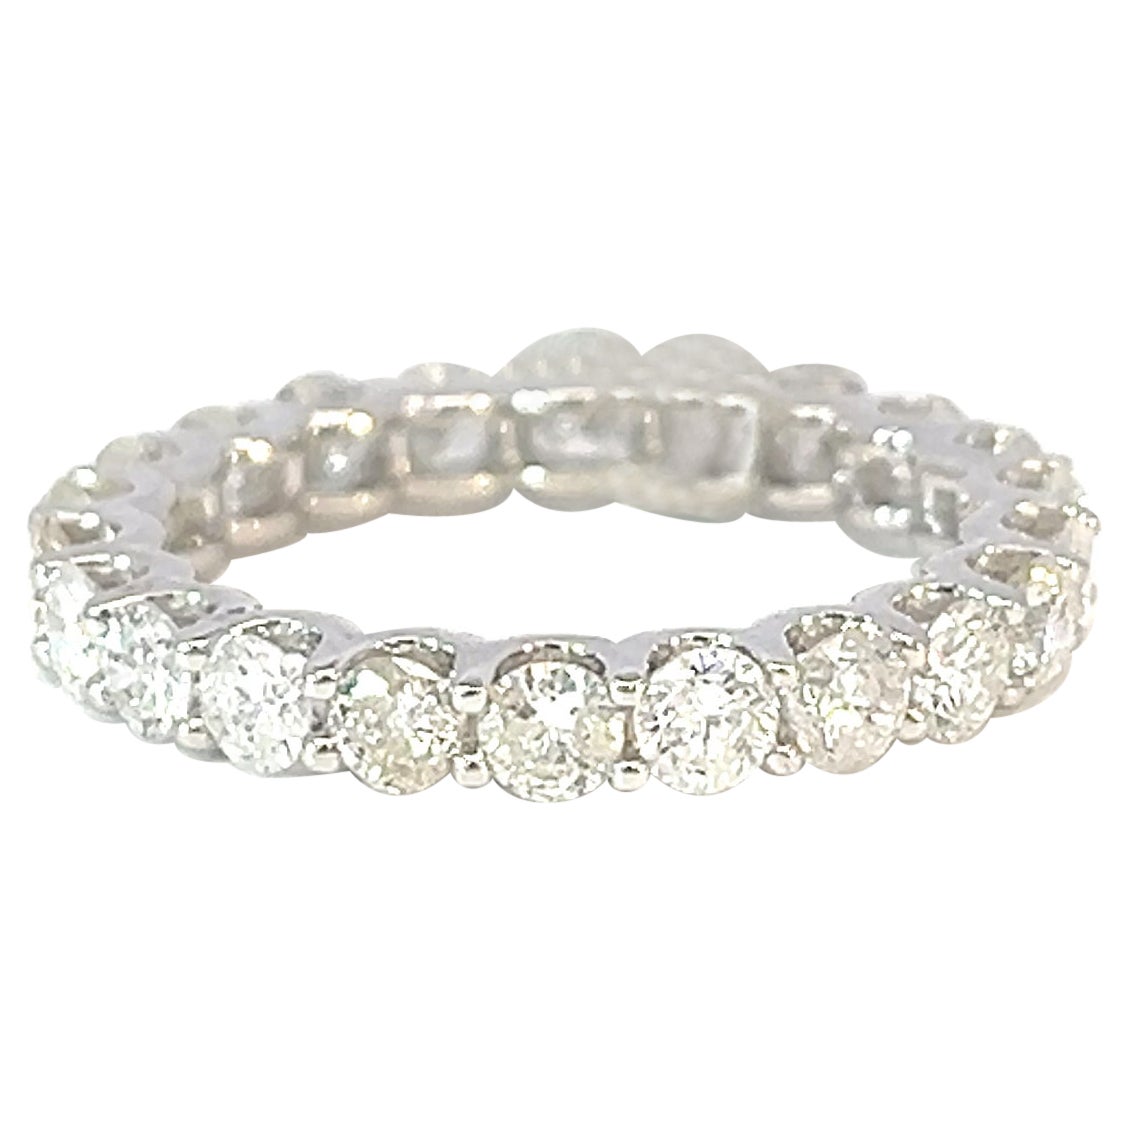 Classic 14k Gold 2.398 Carat Elegant Eternity Band Diamond Ring

Introducing the timeless Classic 14k Gold Elegant Eternity Band Diamond Ring featuring a stunning 2.398 carat of diamonds. This exquisite ring is a symbol of eternal love and enduring